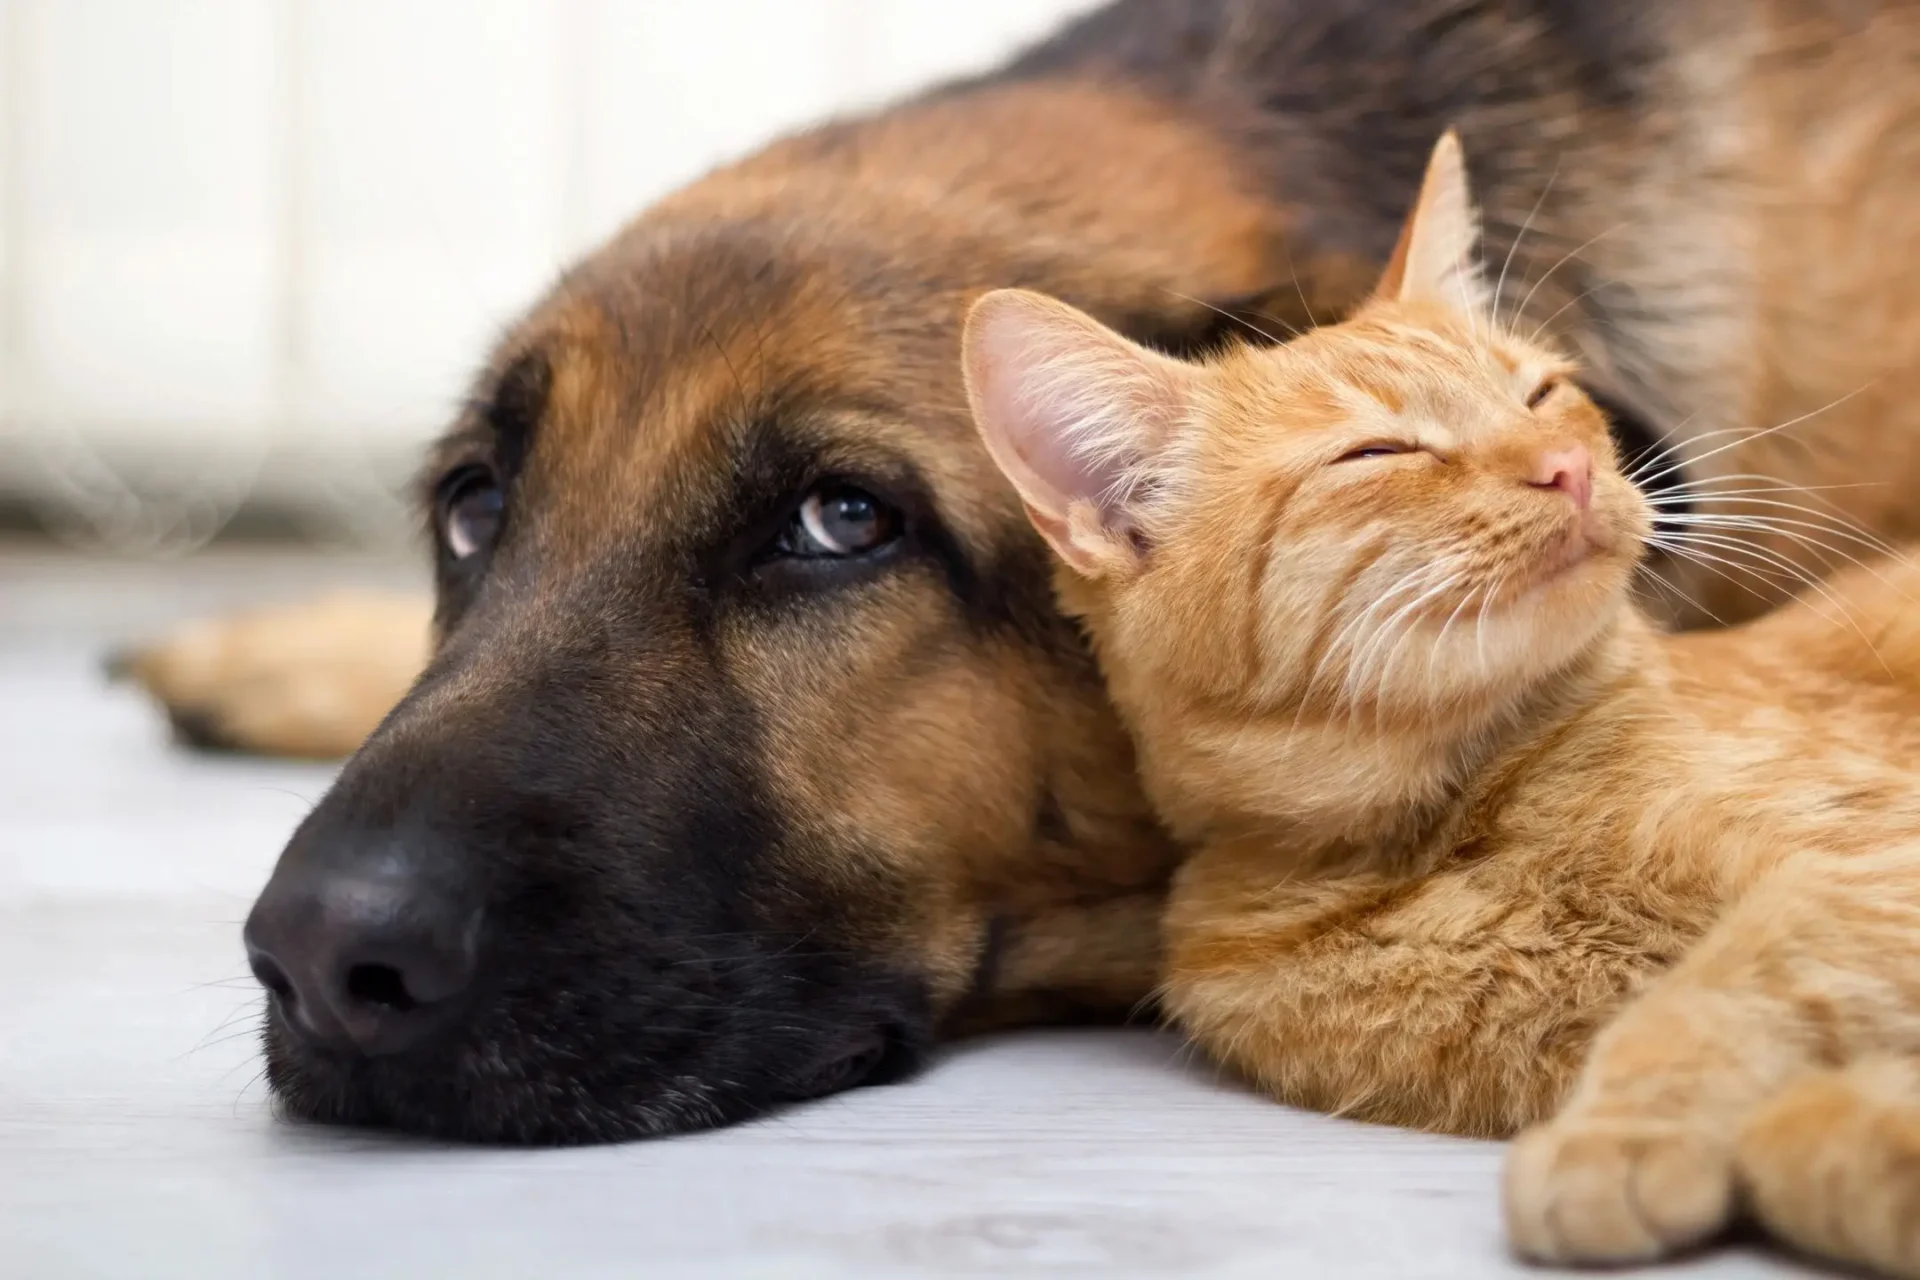 A picture of a cat sleeping beside a dog